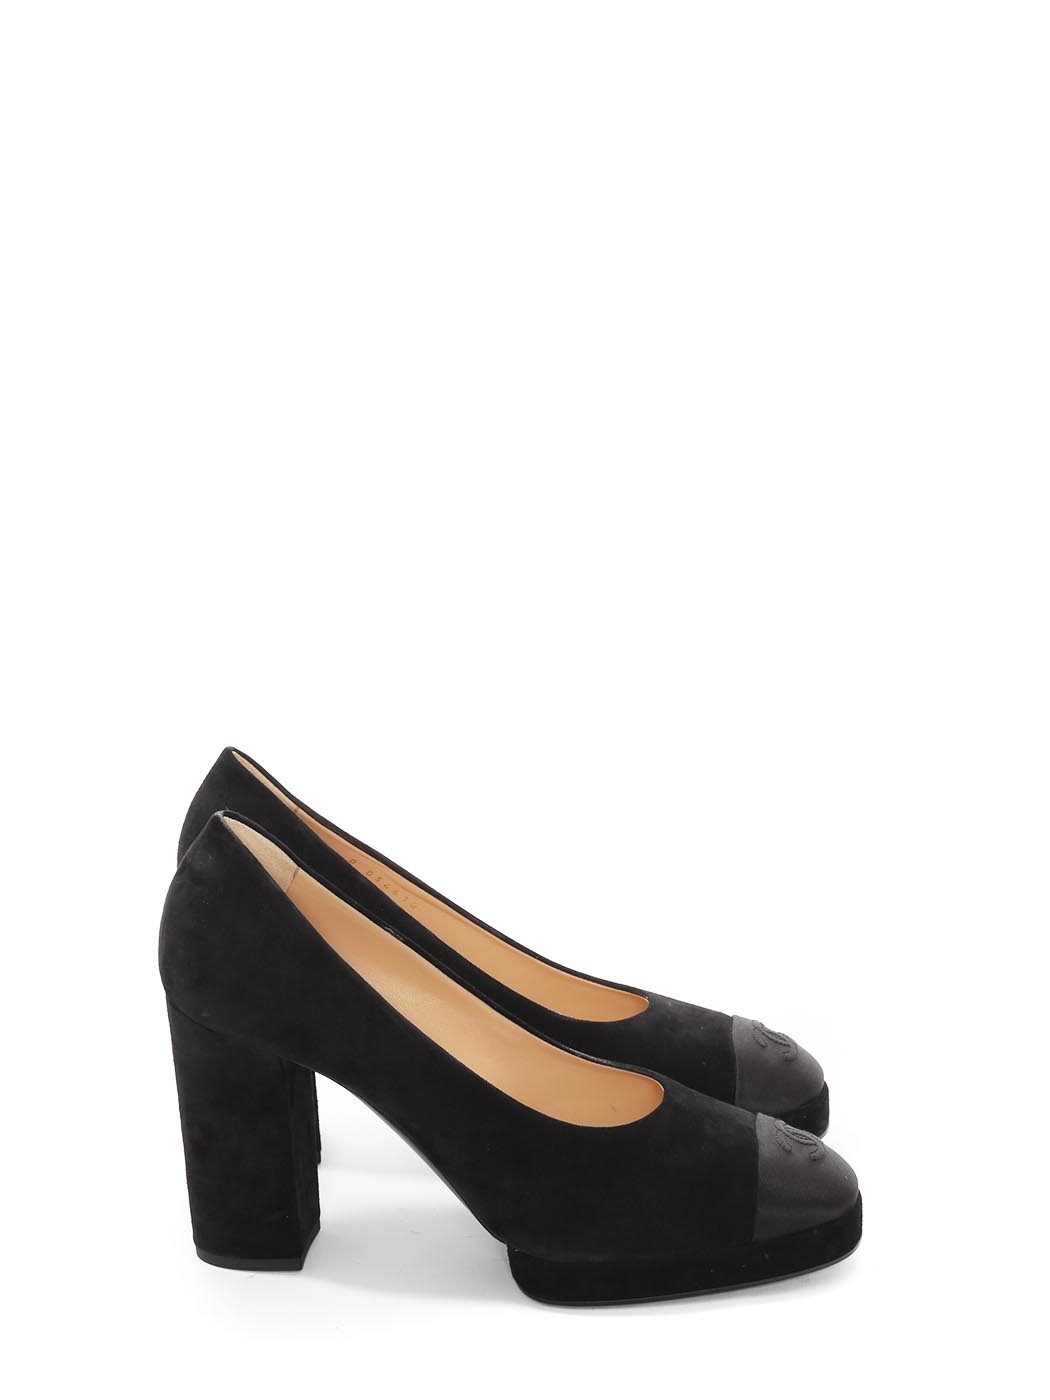 Boutique CHANEL Round-toe platform pumps in black suede and satin Retail  price 1100€Size 42